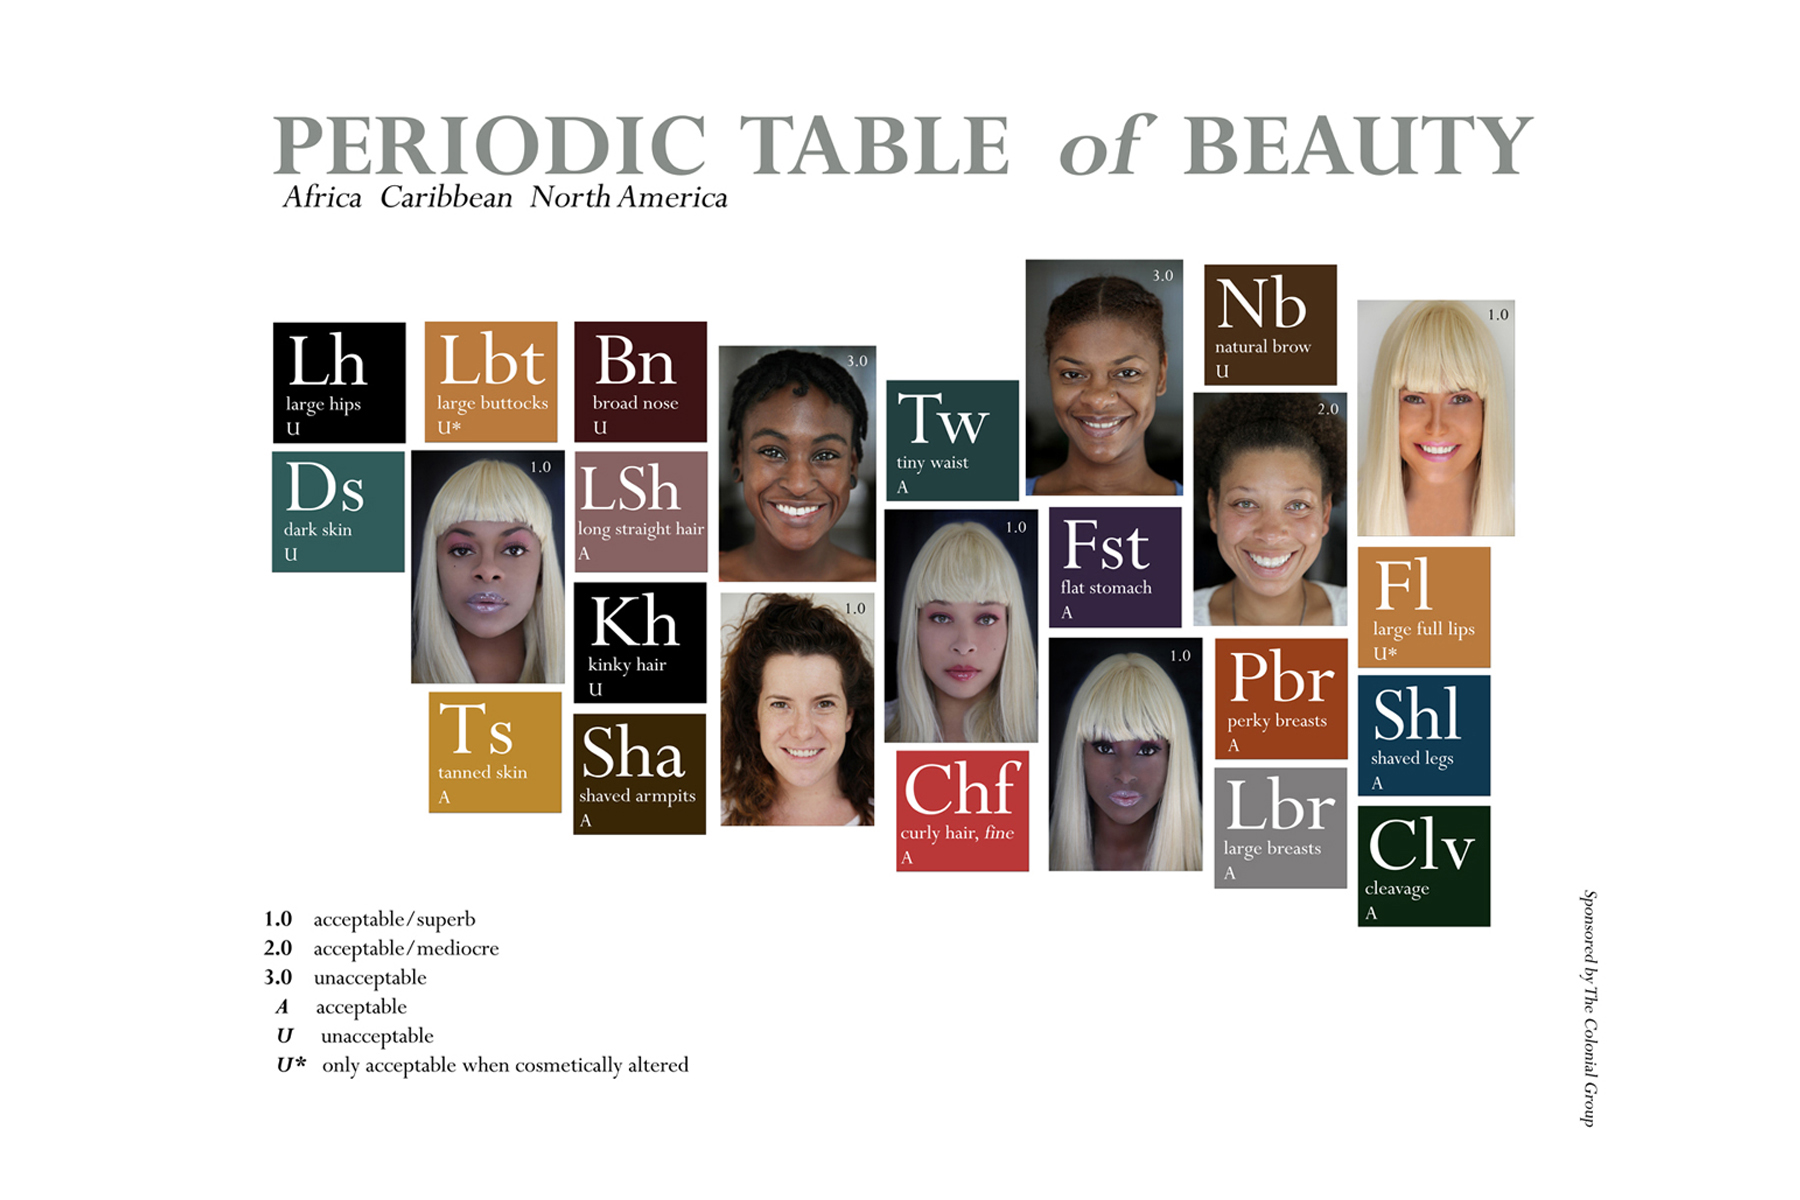 Janet E. Dandridge. Follow These Rules: Periodic Table of Beauty 2013 Photography. Graphic-Design, Dimensions are site-specific